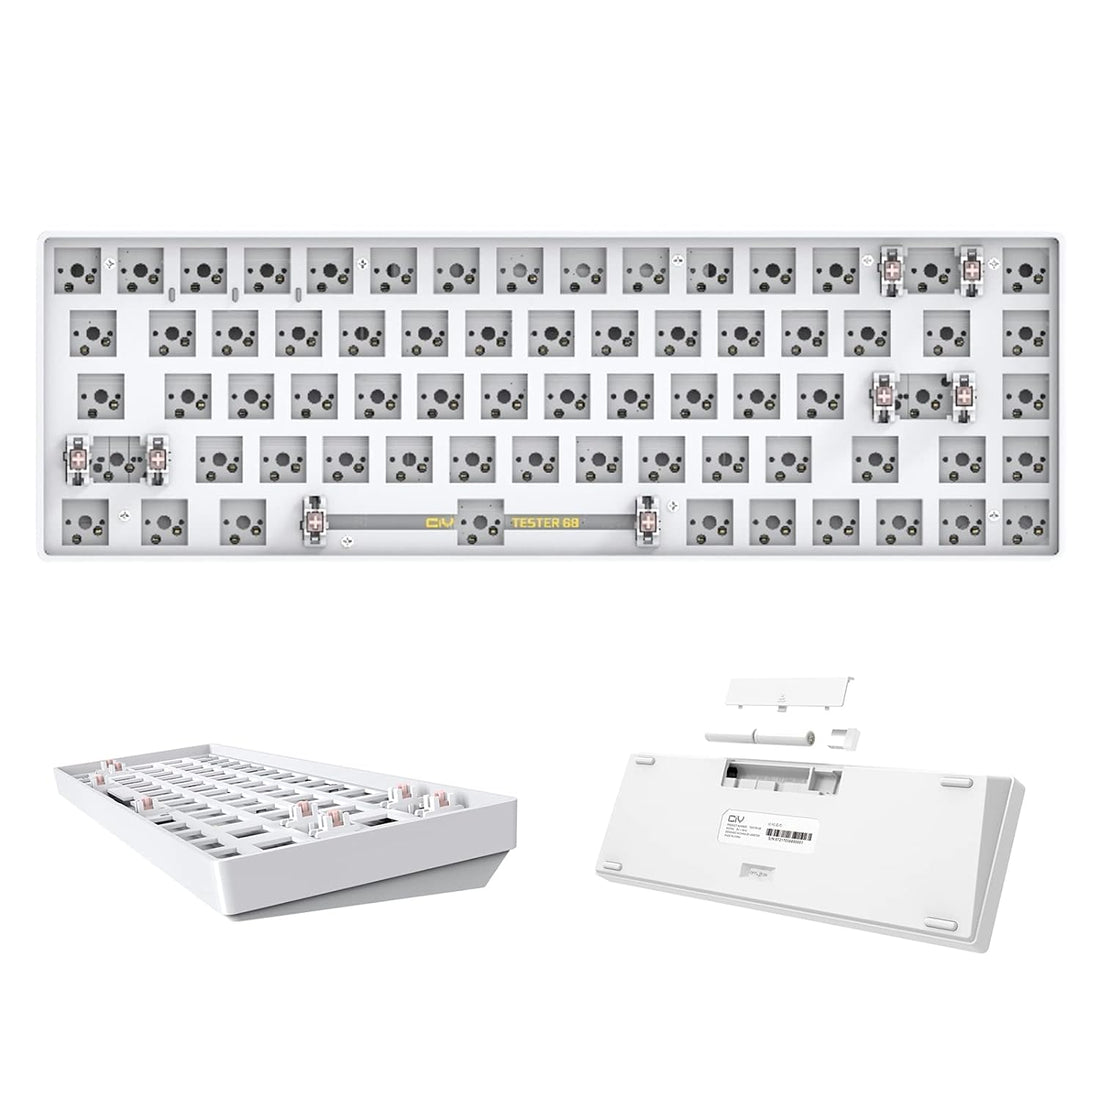 CIY GK68 Dual Mode Wireless Hotswap Keyboard Kit, DIY 65% Keyboard, Bluetooth 5.0/2.4G Wireless, Replaceable MX Switch 5Pin/3Pin, ABS Shell,Metal Positioning Plate, Sound Insulation Mat(White)